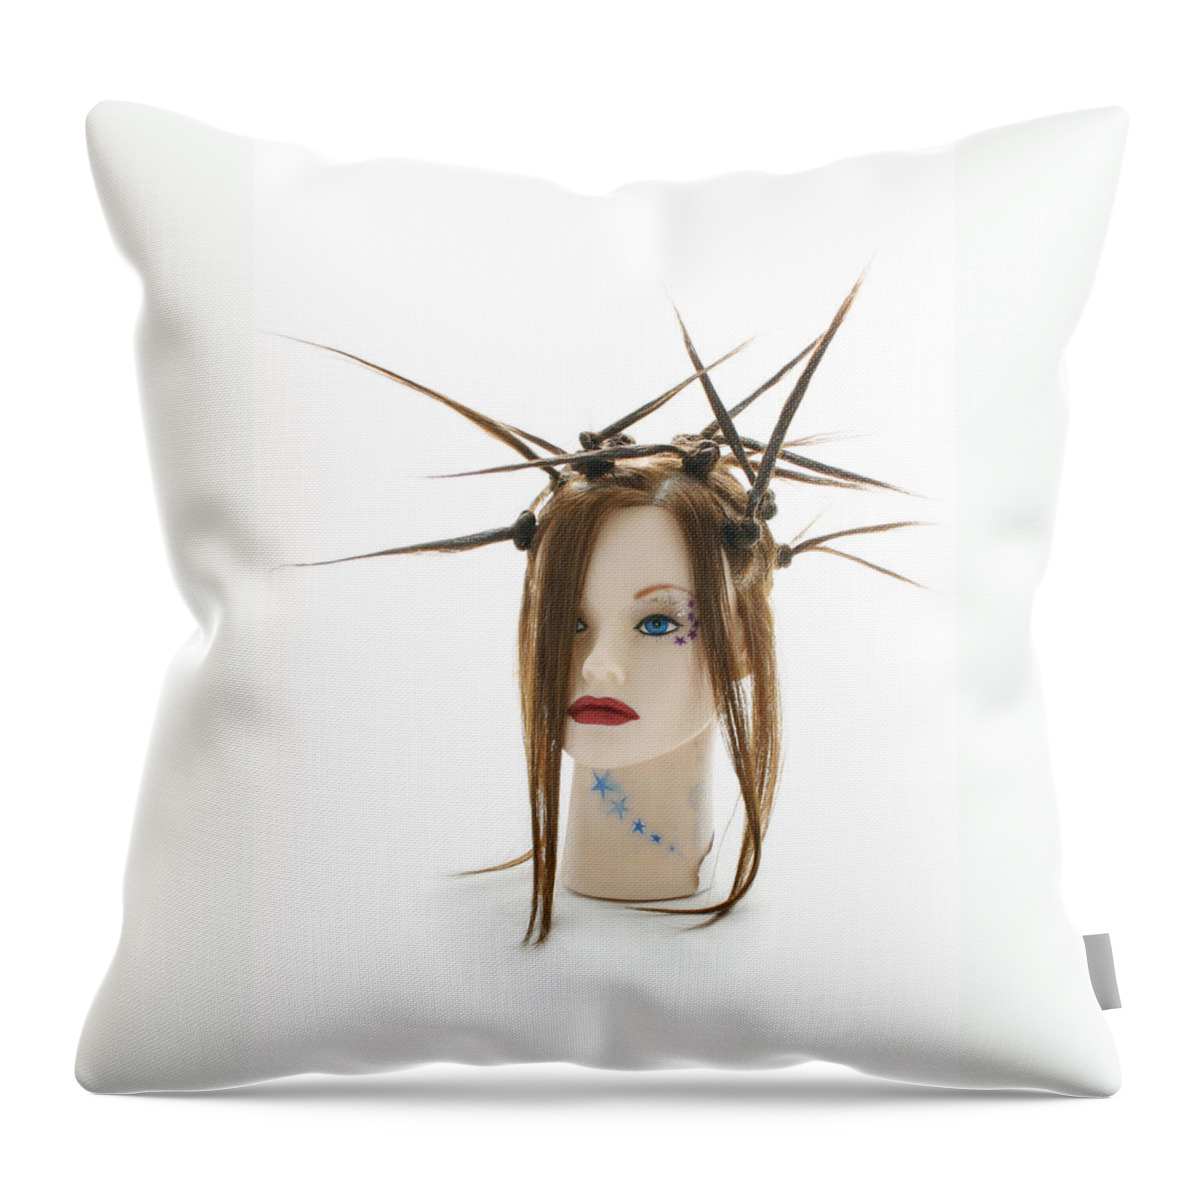 Mannequin Throw Pillow featuring the photograph Lookin' Good by Patty Colabuono